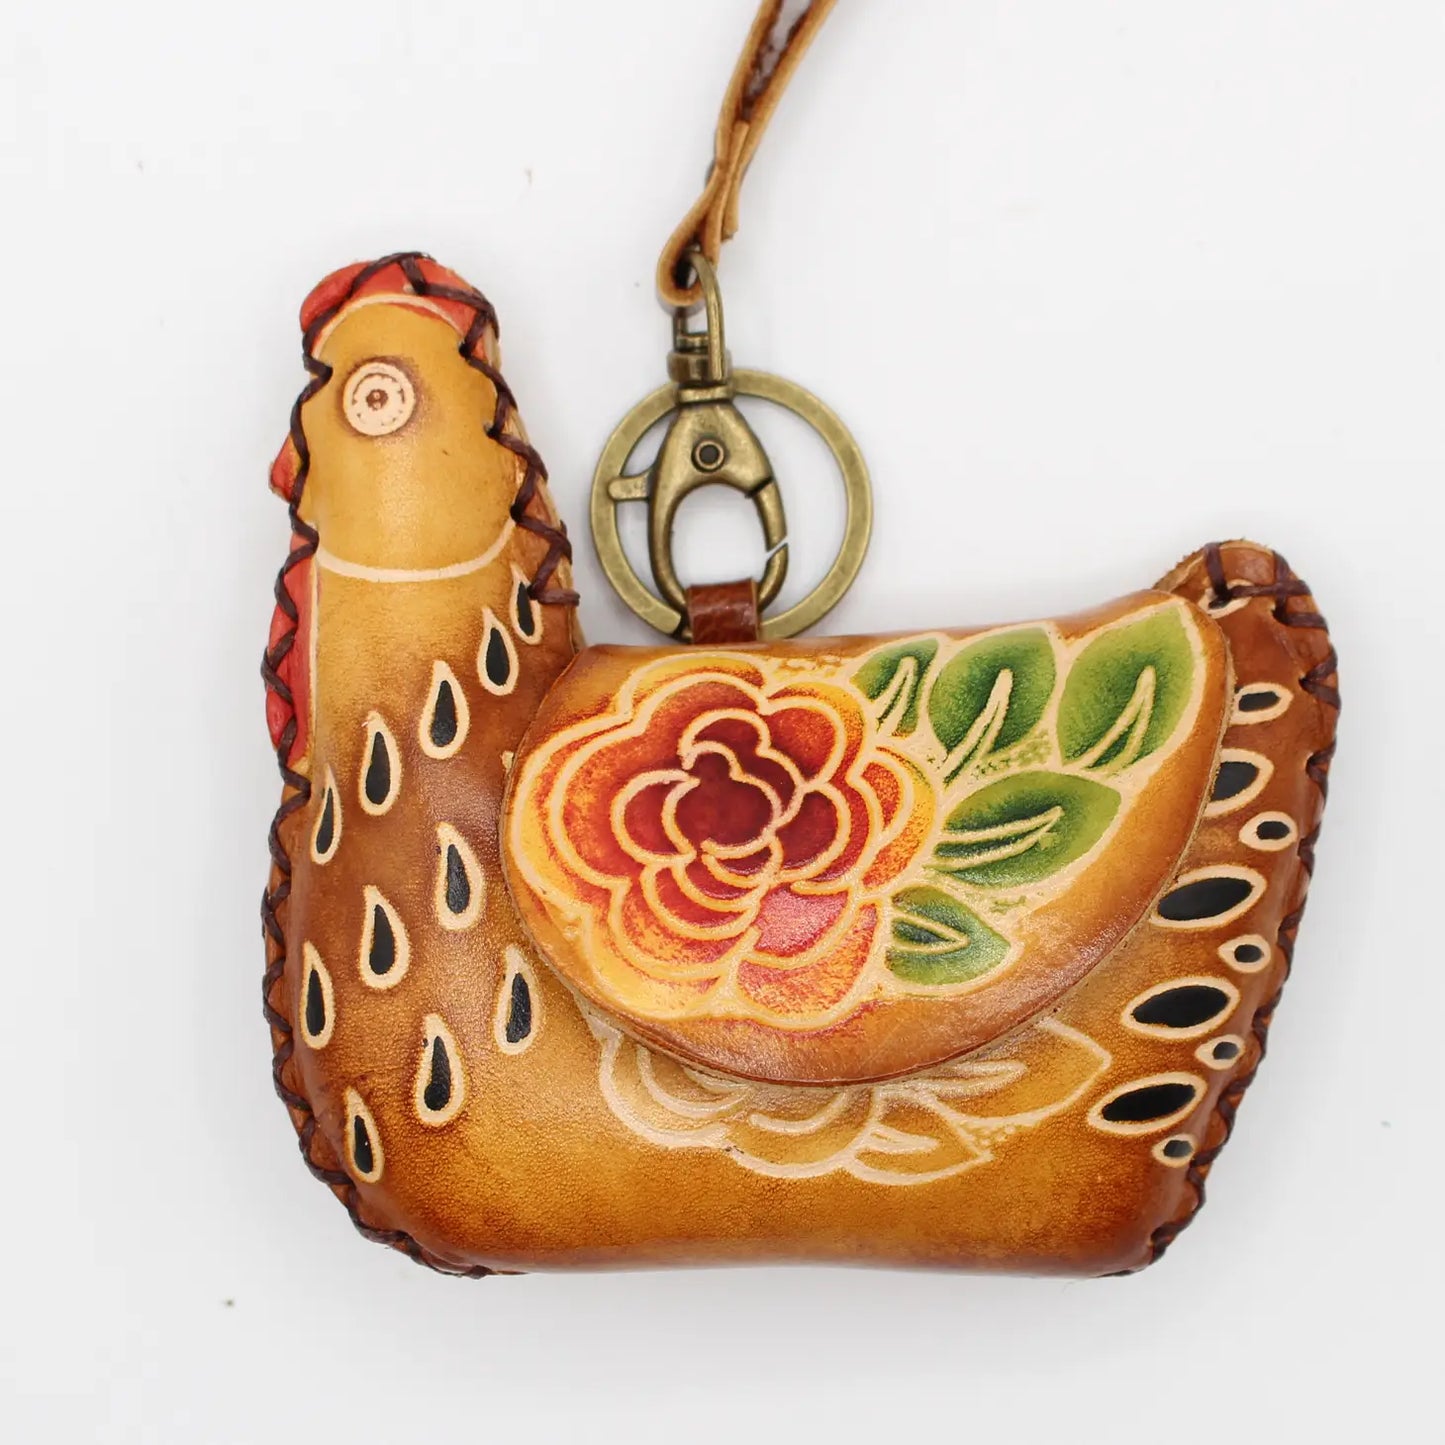 Chicken Hen Wristlet - Leather Coin Purse Wallet Red Blue or Brown